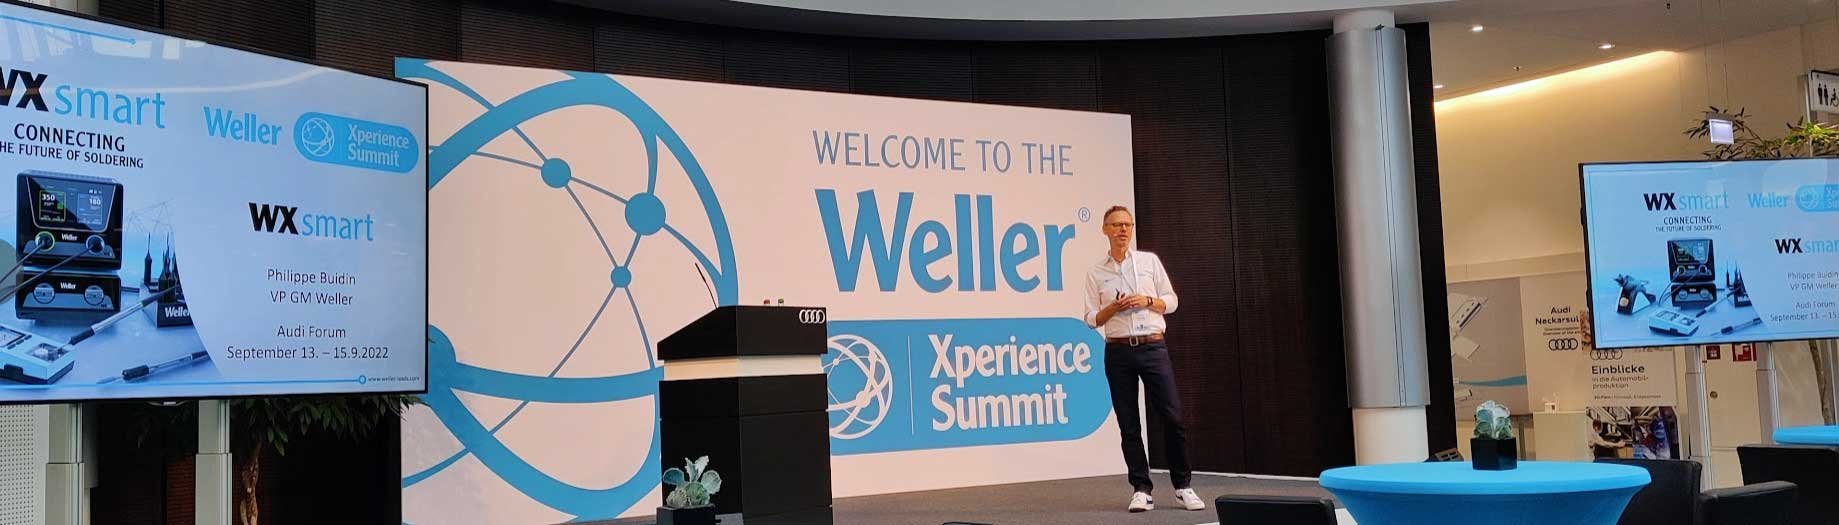 Weller Xperience Summit 2022